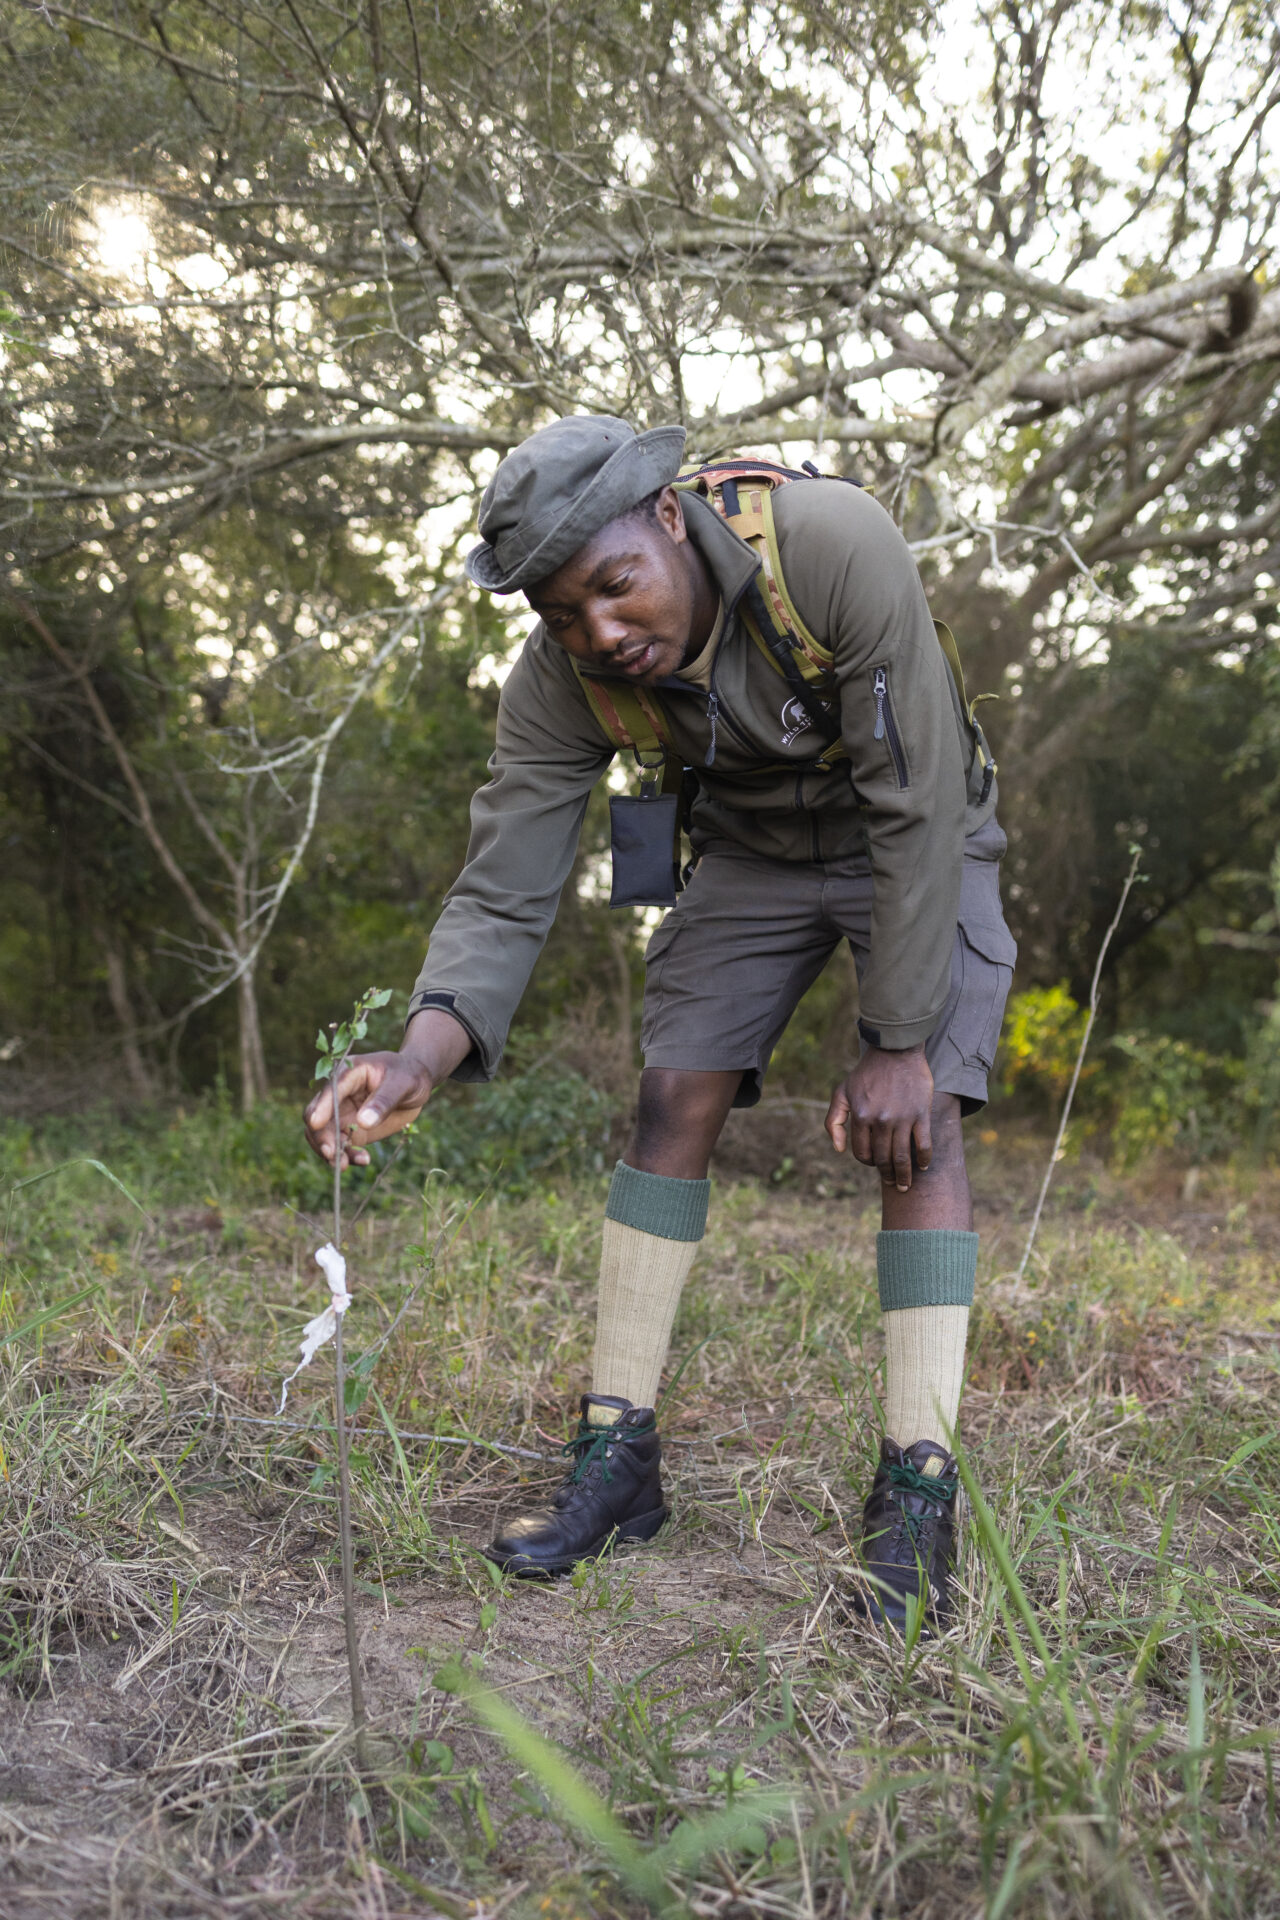 Ranger Siya leans down to check on a tree sapling planted in the ground